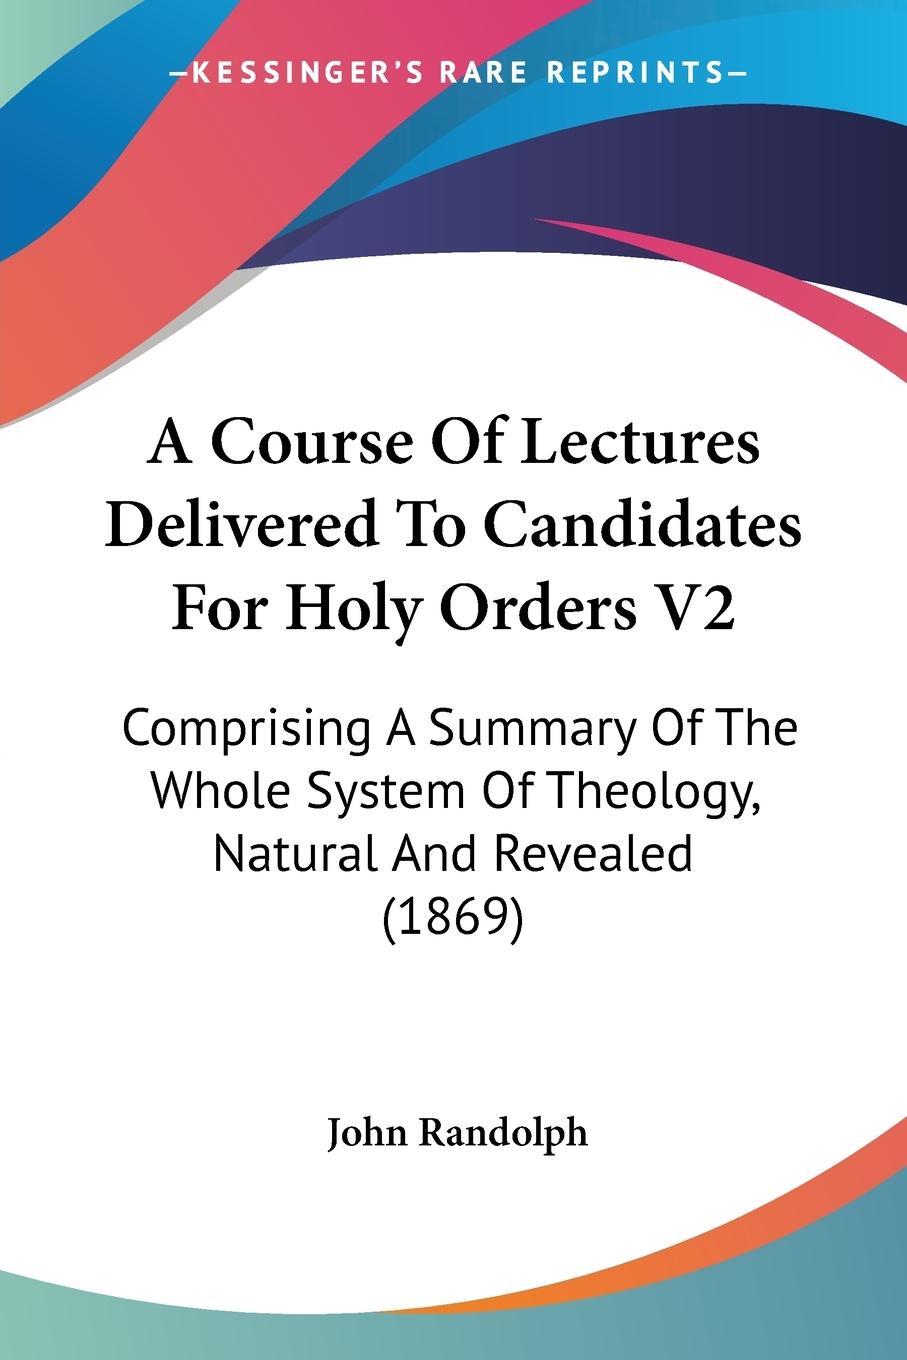 A Course Of Lectures Delivered To Candidates For Holy Orders V2 - Randolph, John